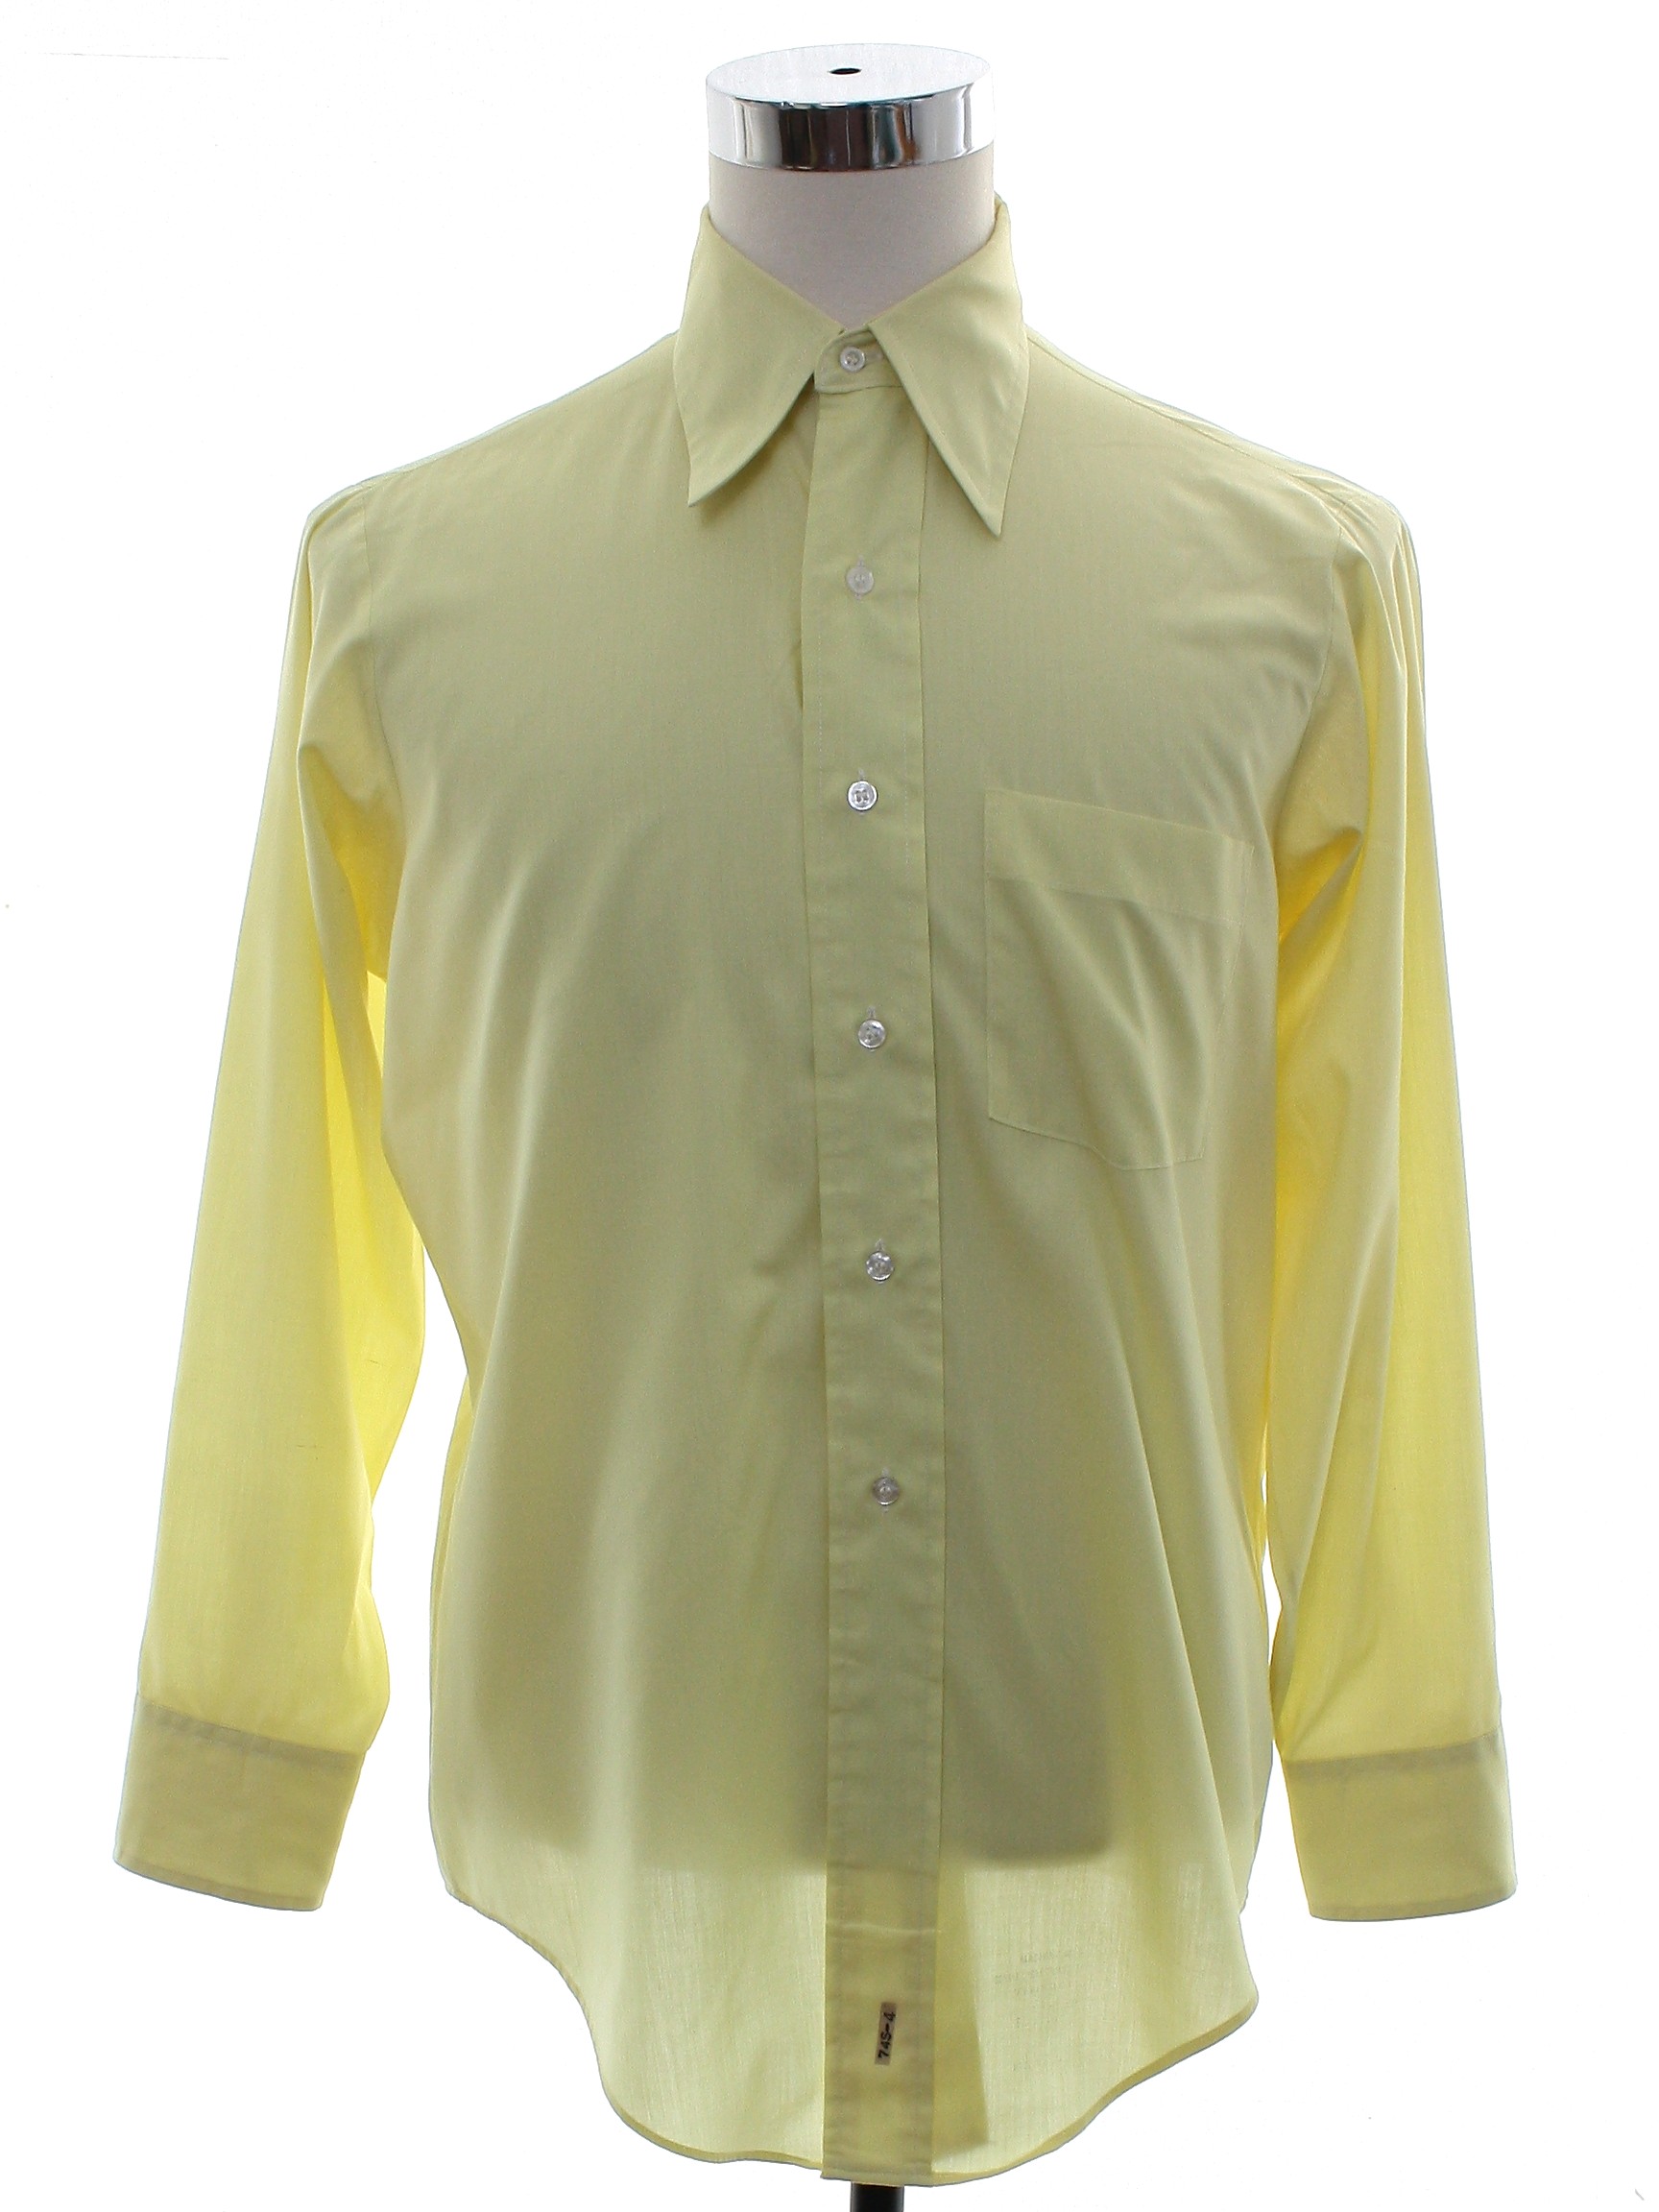 1970s Arrow Kent Collection Shirt: Early 70s -Arrow Kent Collection ...